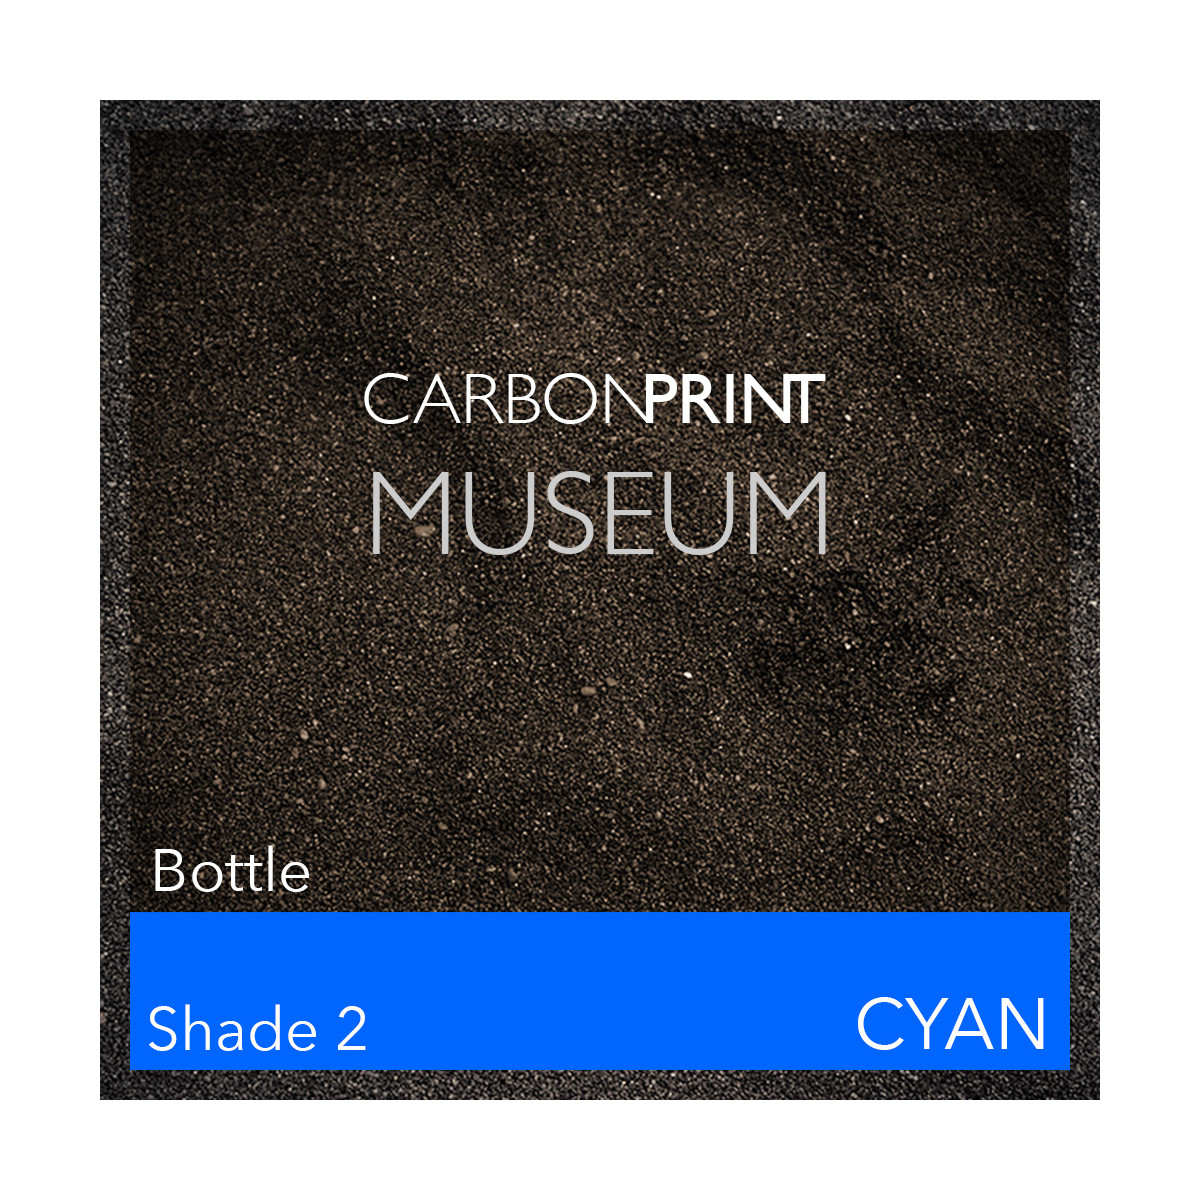 Carbonprint Museum Shade2 Channel C